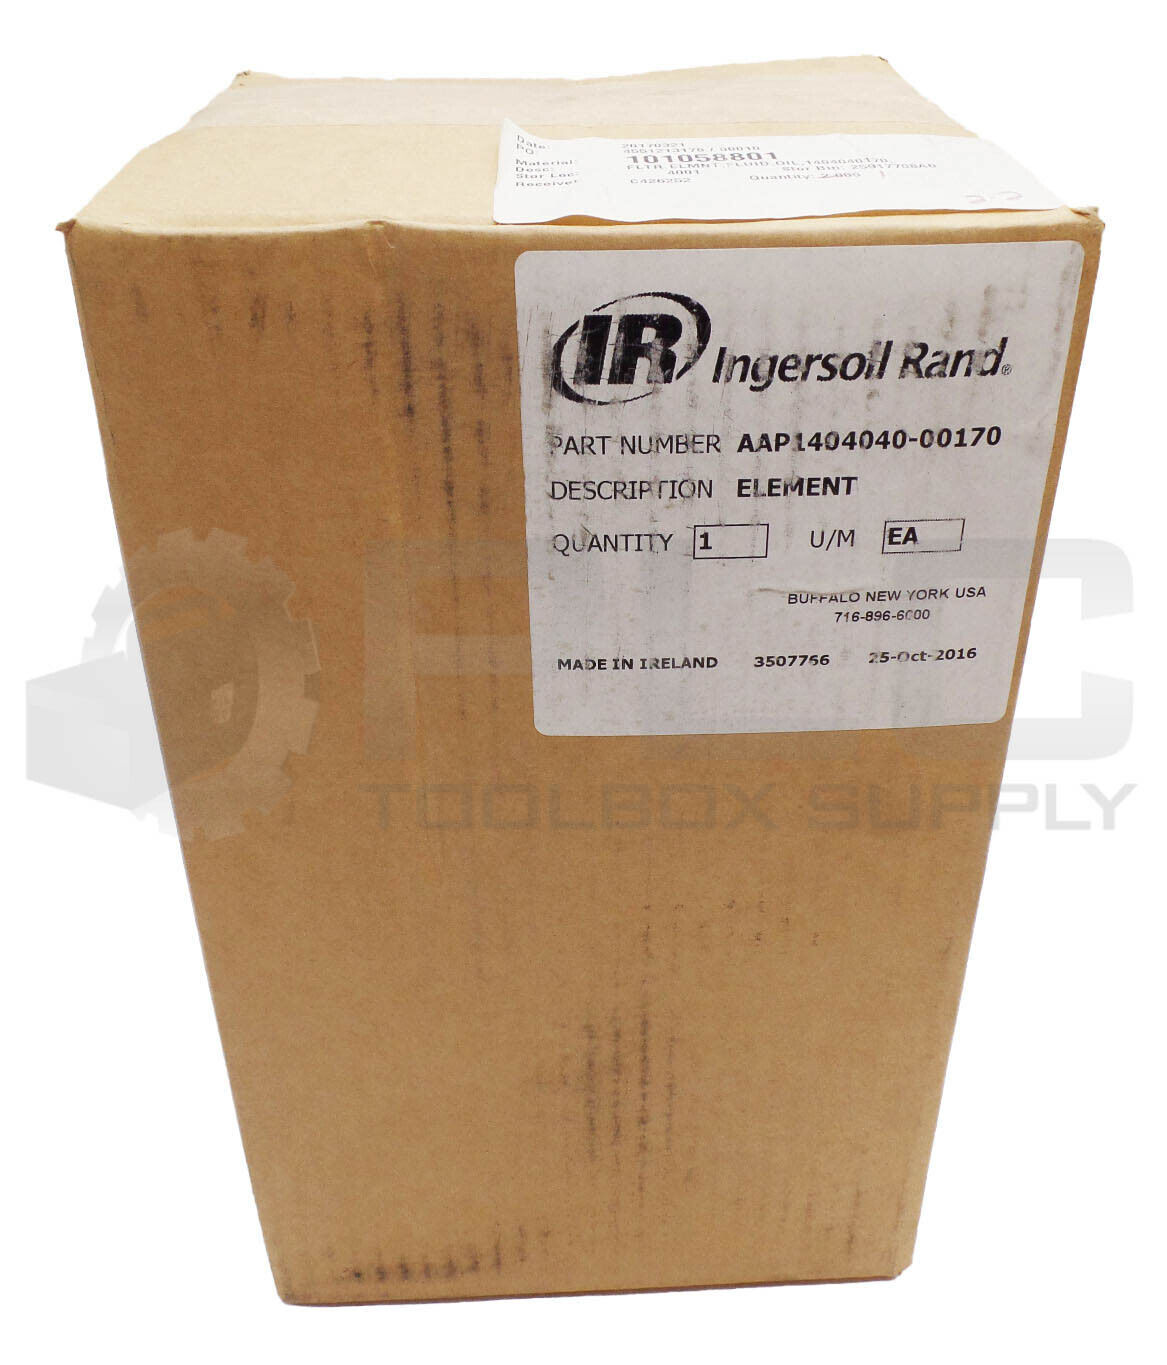 SEALED NEW INGERSOLL RAND AAP1404040-00170 OIL FILTER ELEMENT